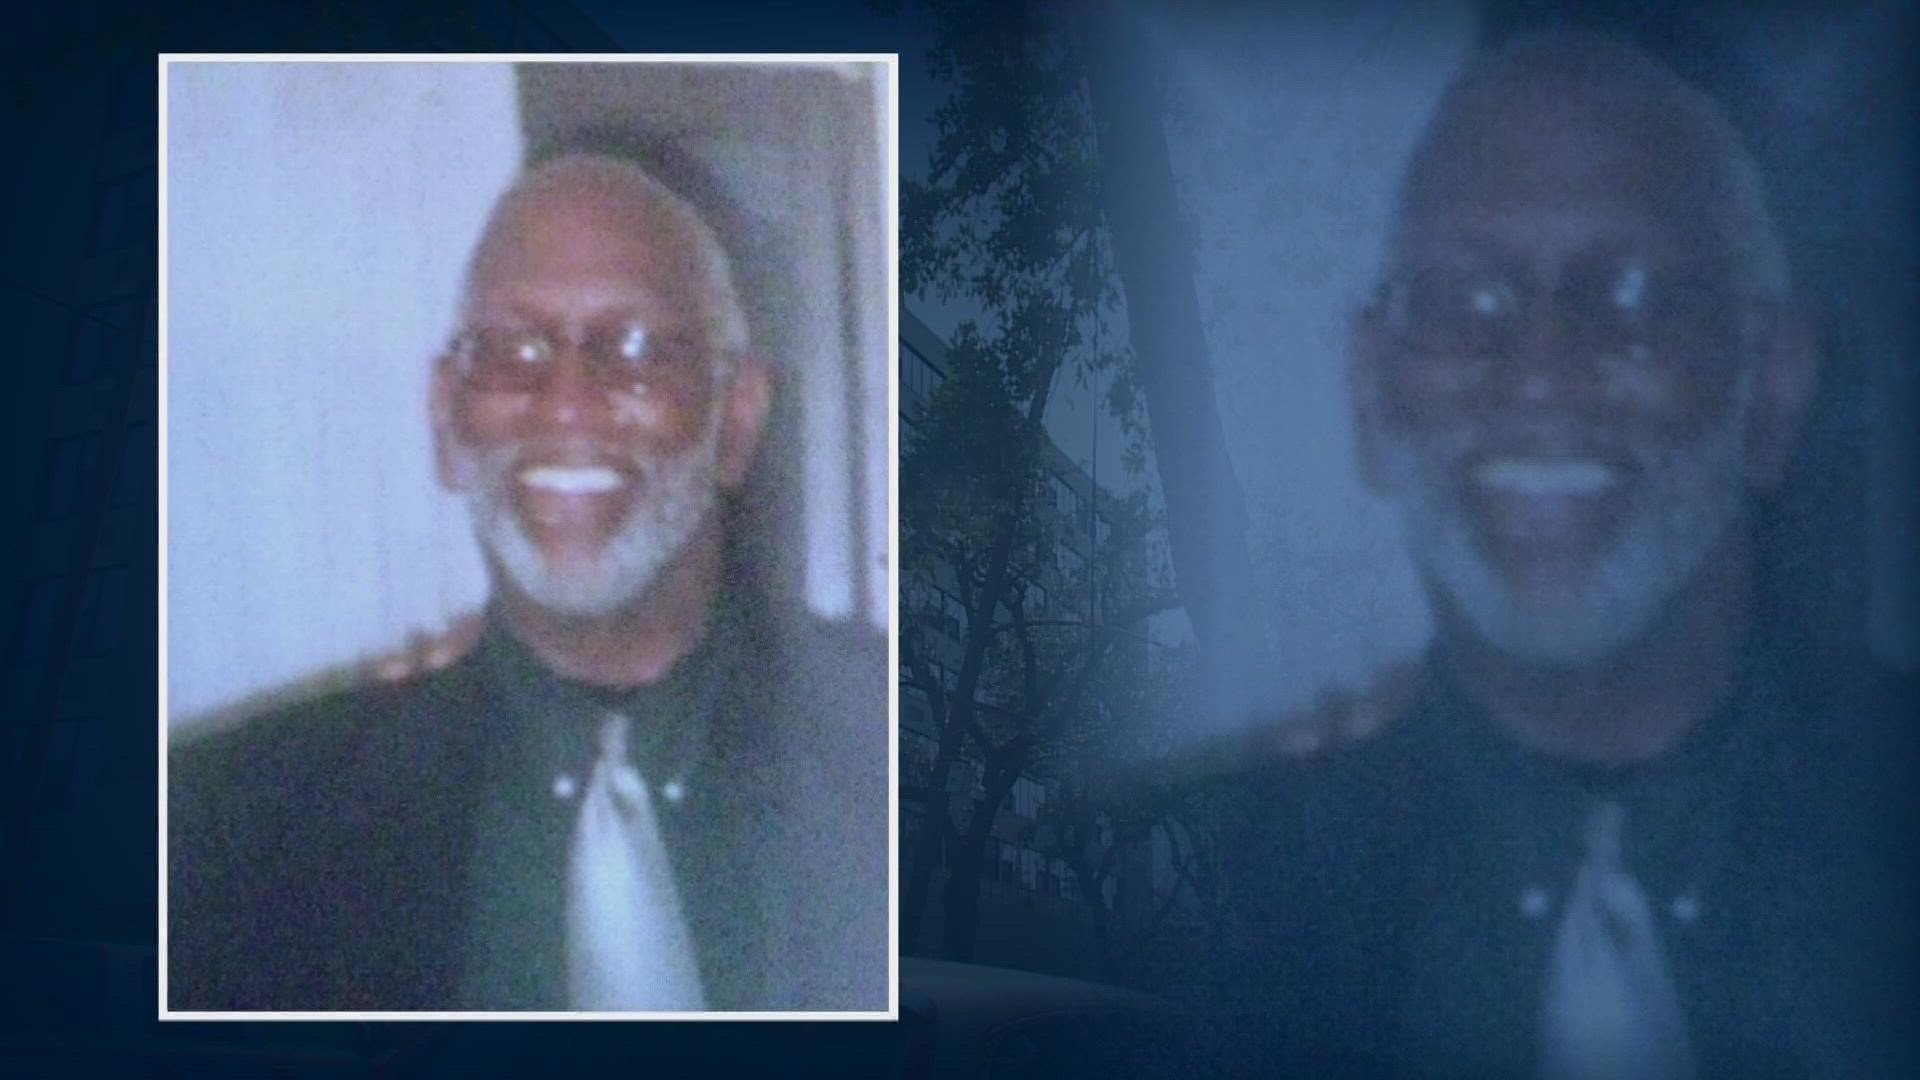 65-year-old Myron Jones was found dead in his senior apartment, one year ago, after not being evacuated.